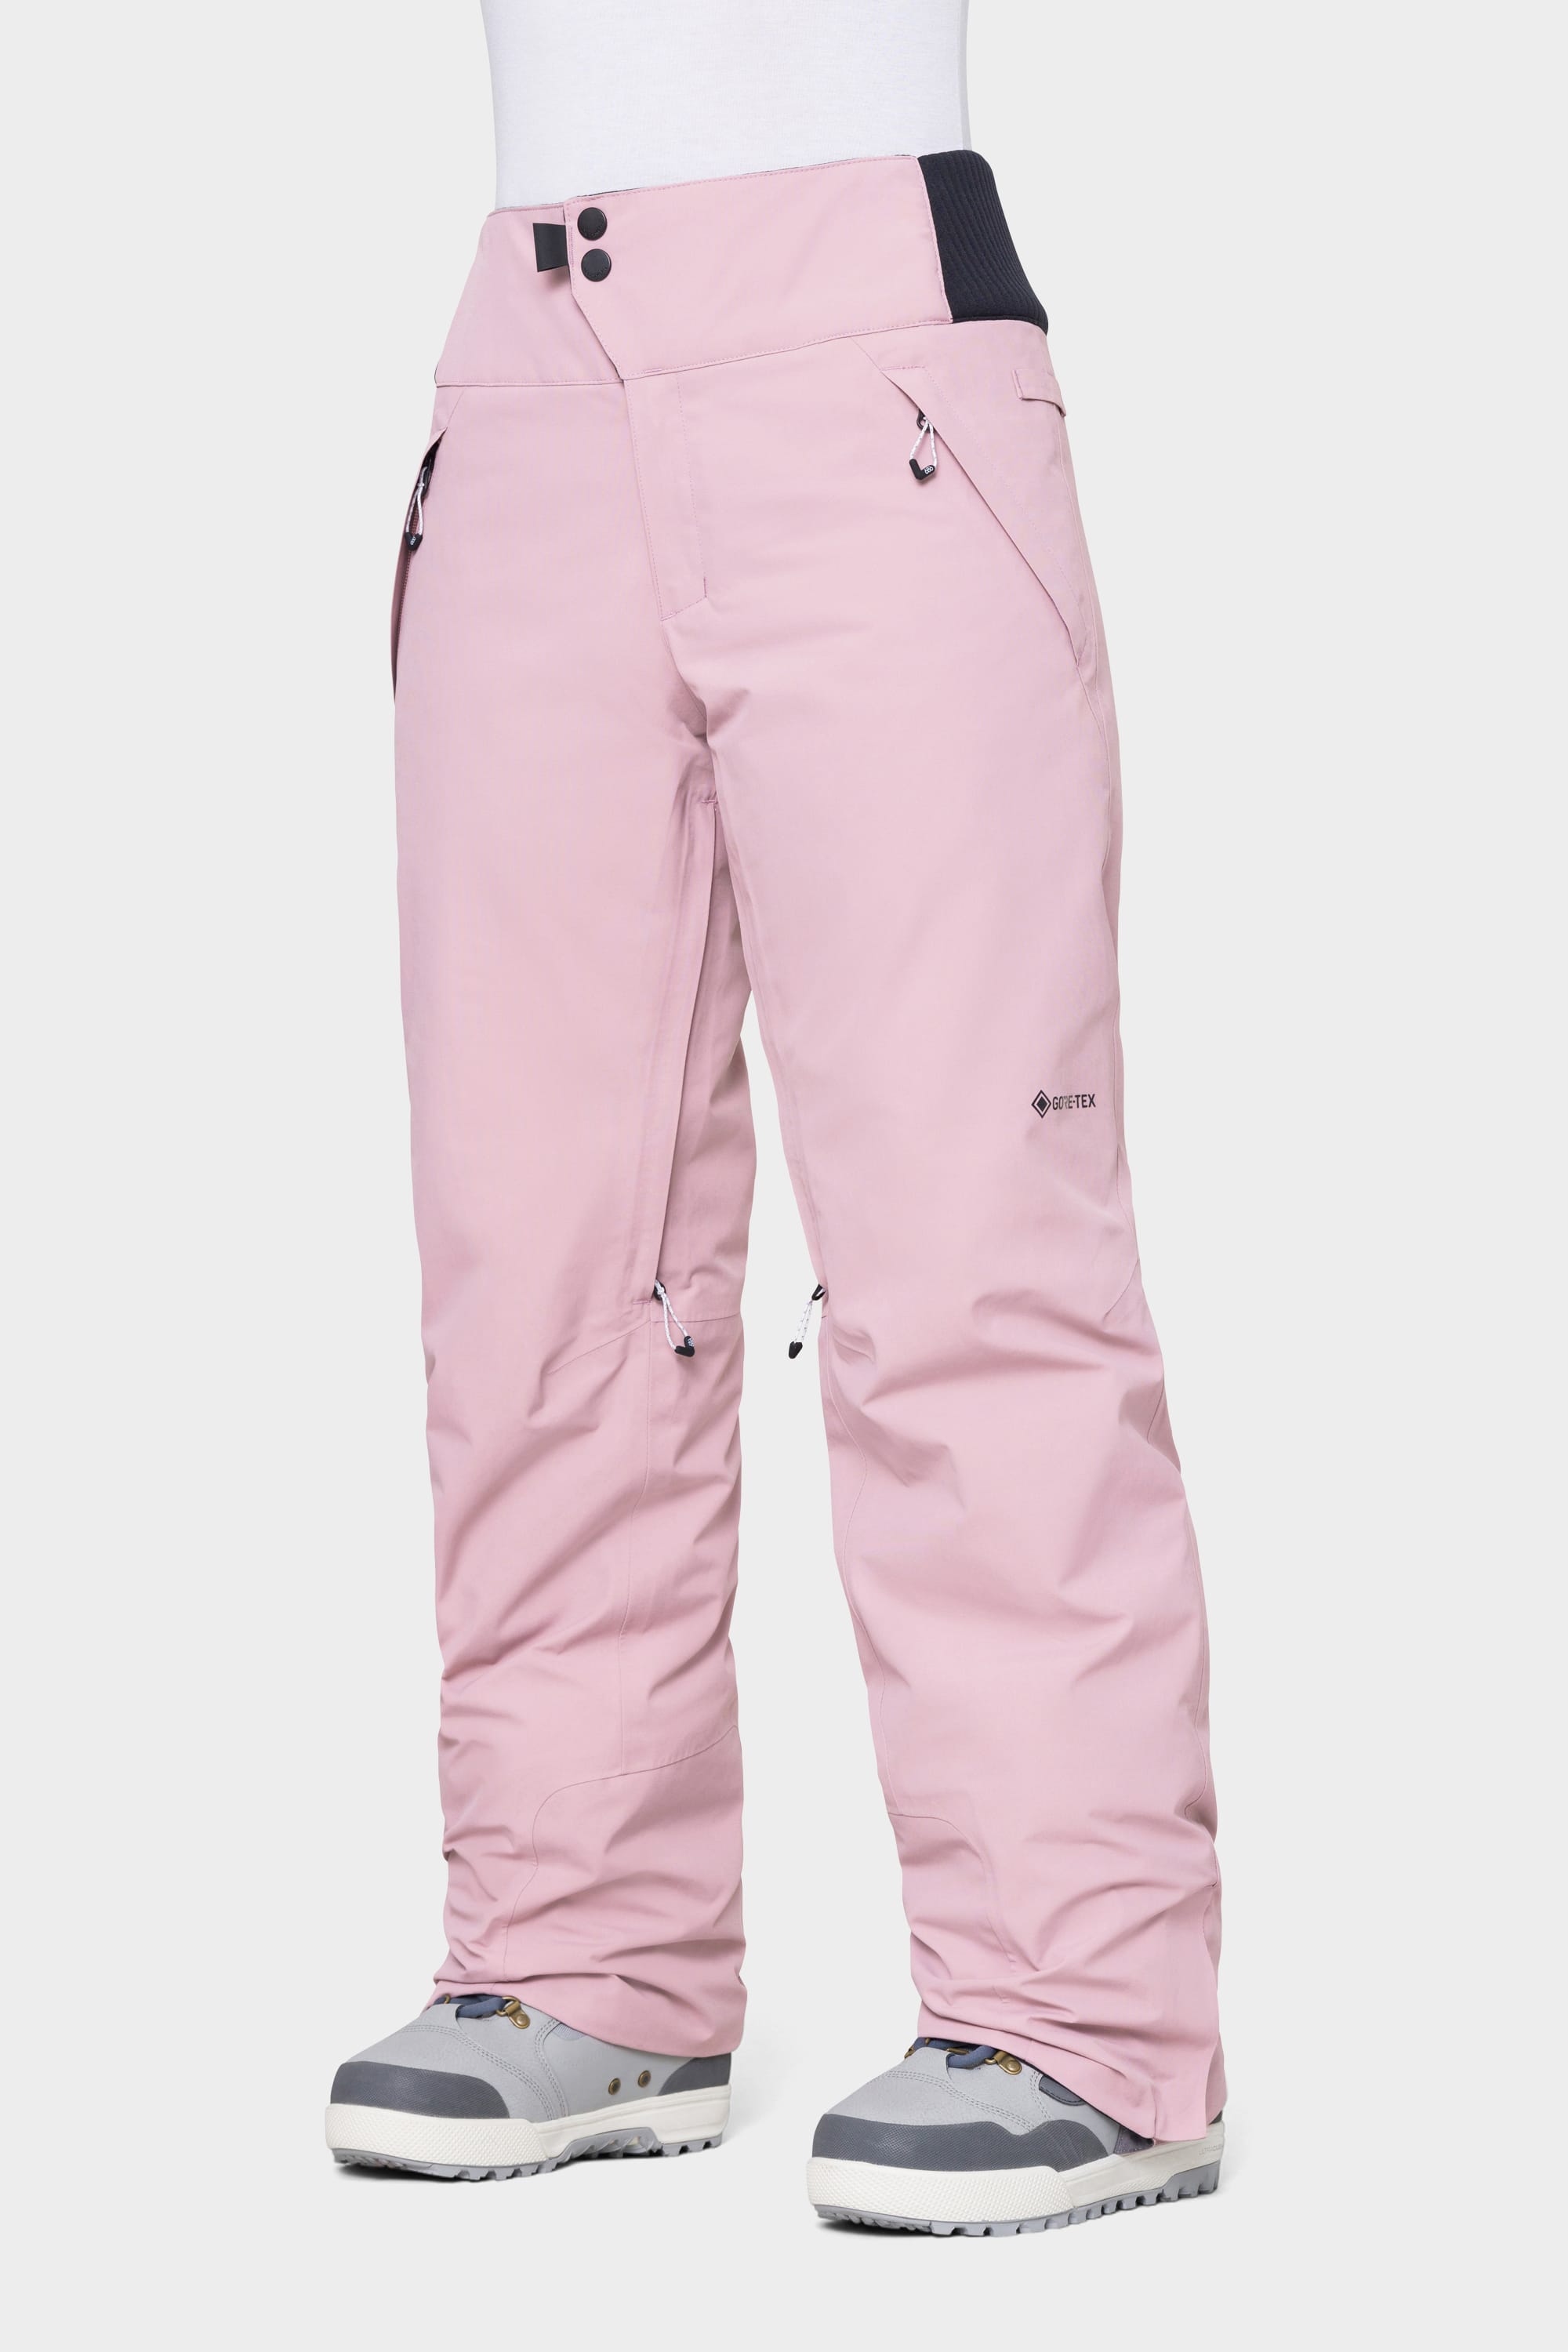 686 Womens Gore-Tex Willow Pant Dusty Mauve